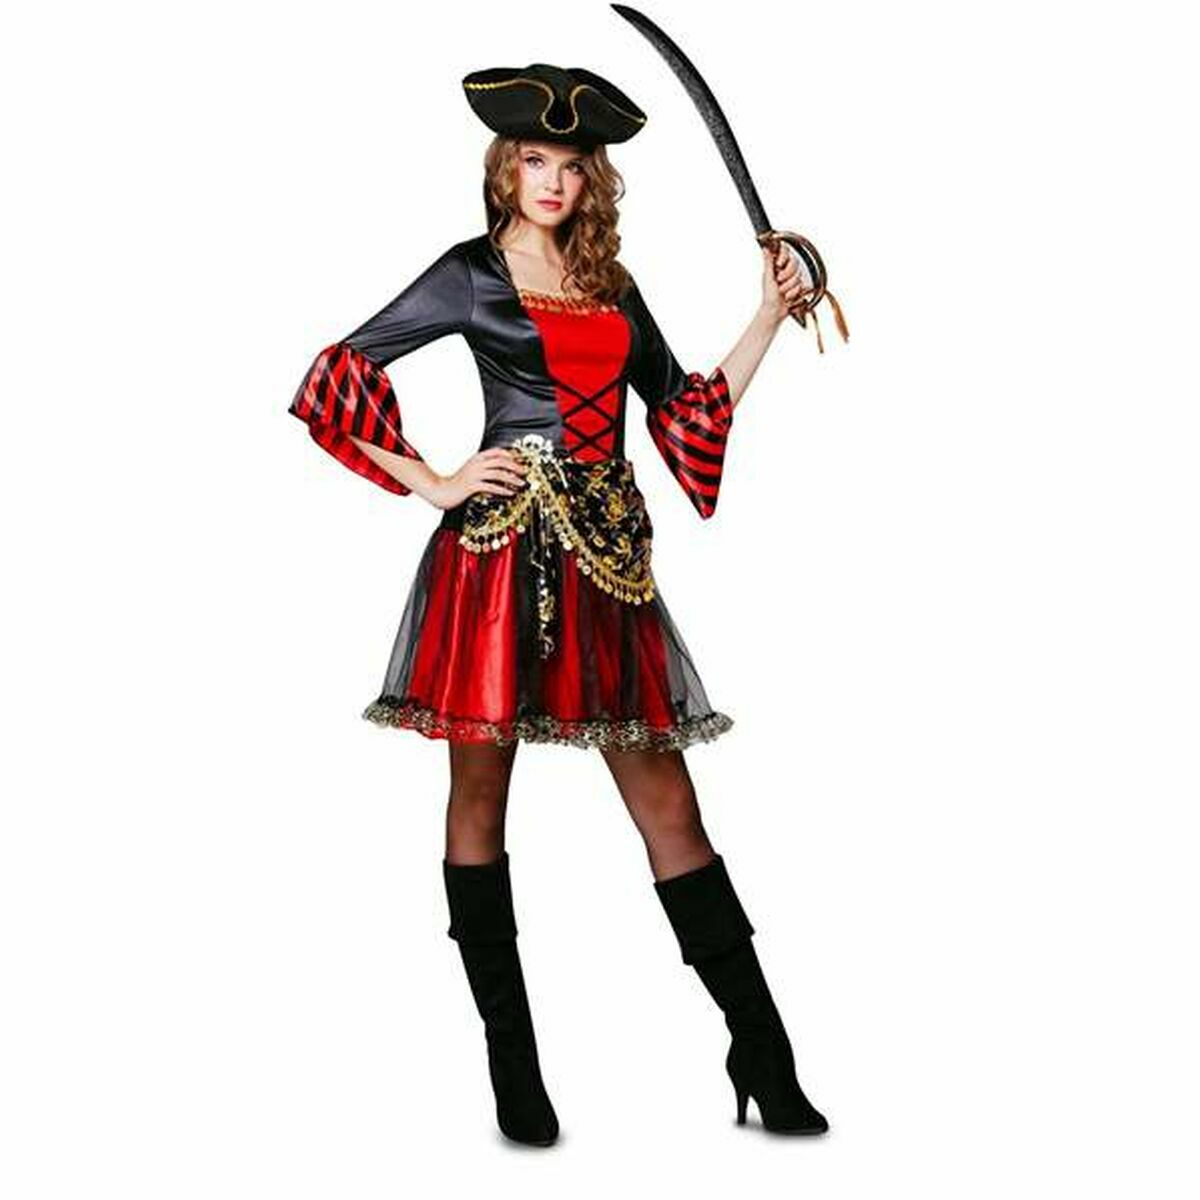 Costume for Adults My Other Me Pirate Red